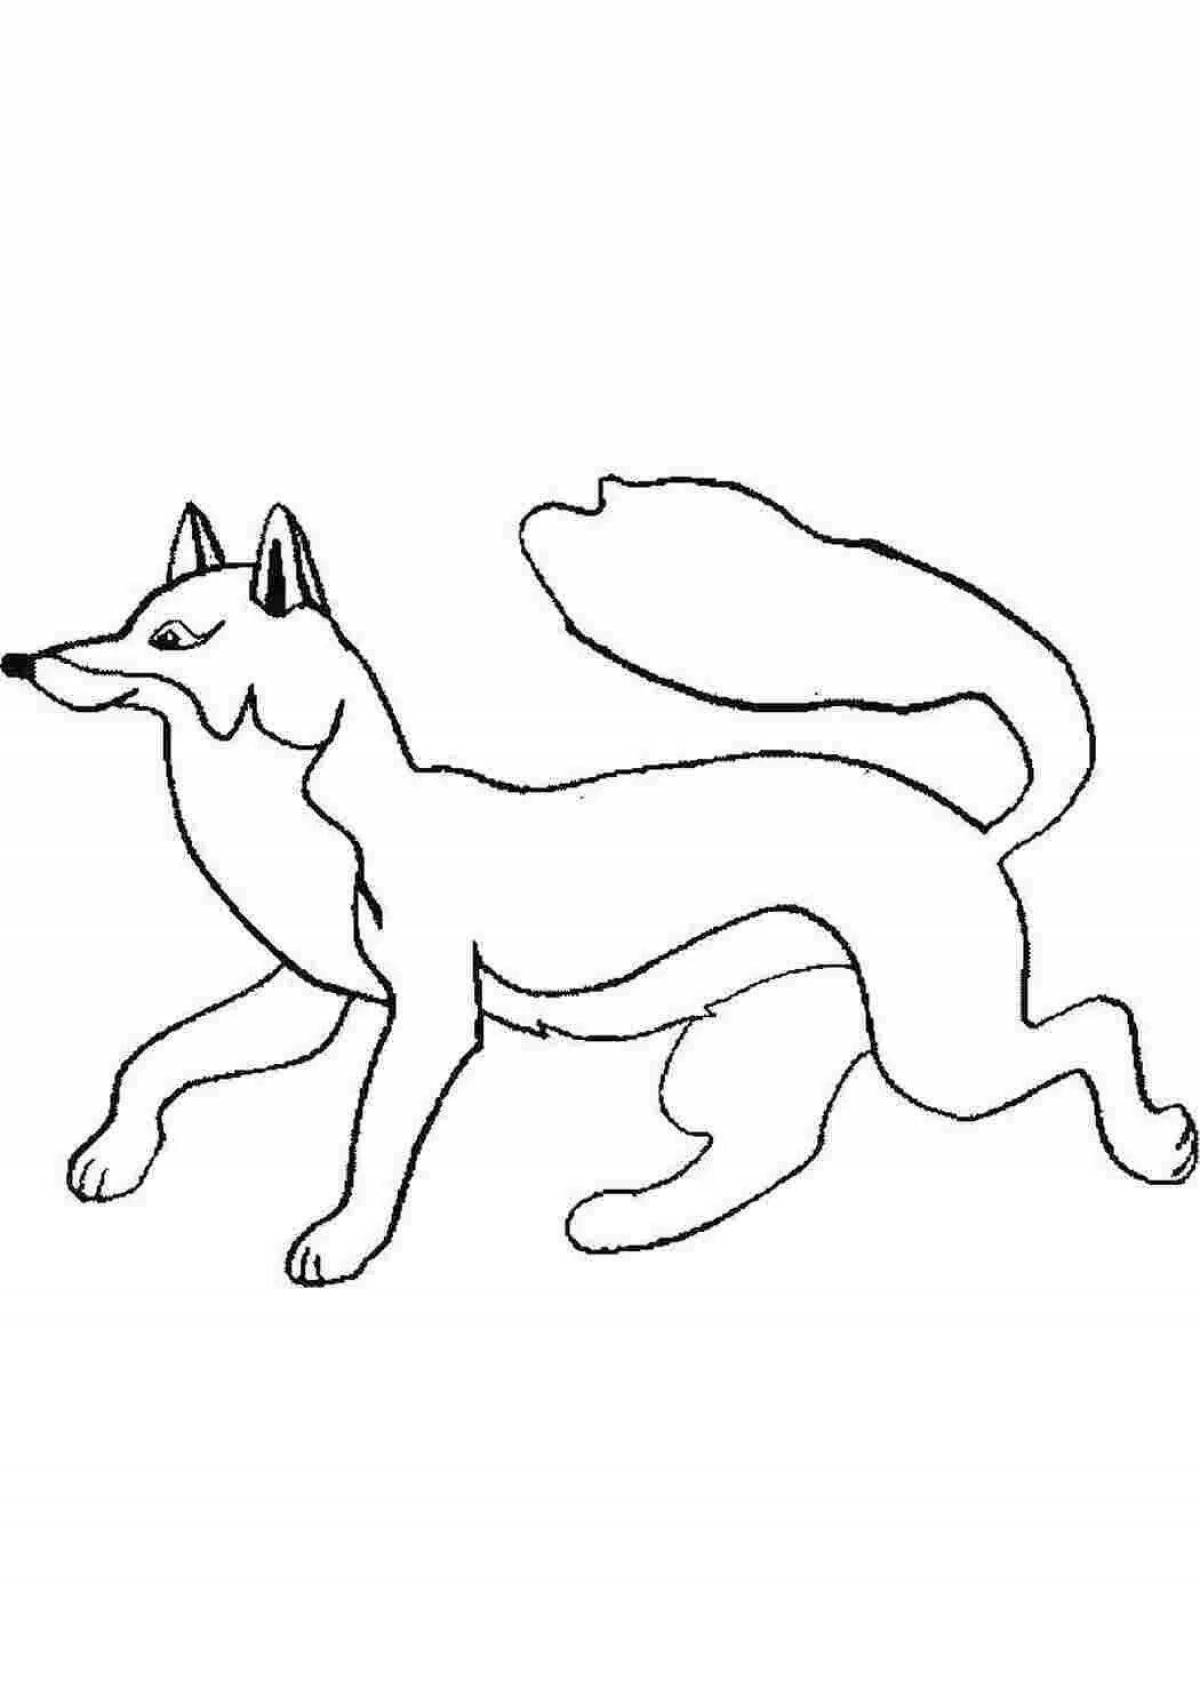 Animated sly fox coloring page